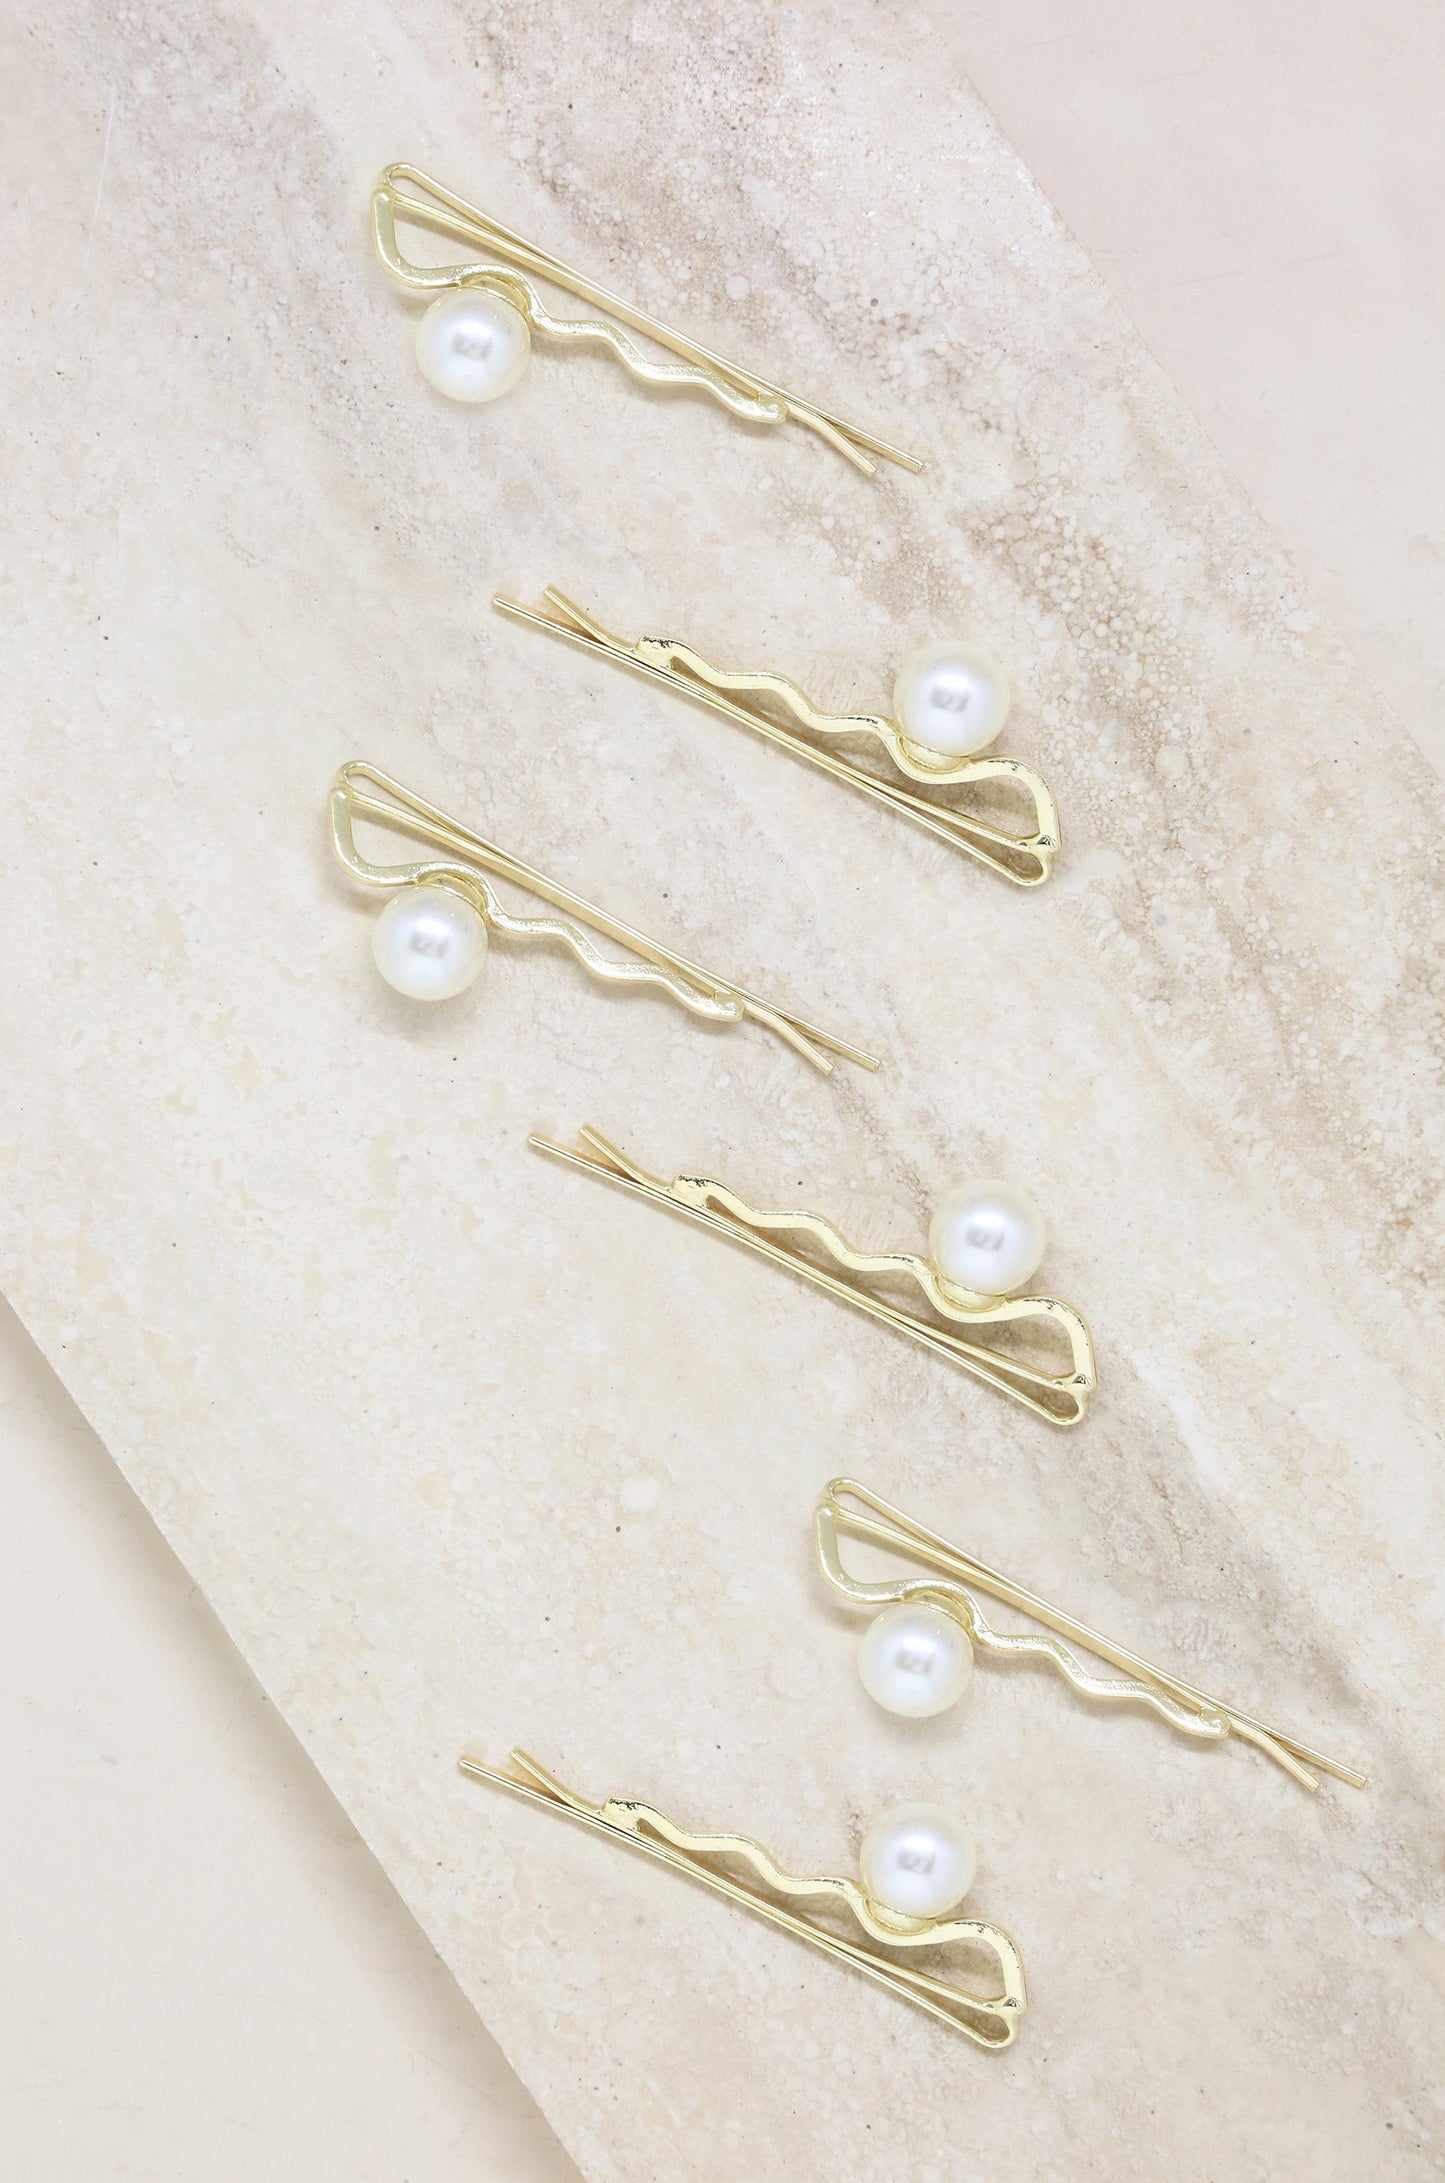 Zig Zag Pearl and Gold Hair Pin Set of 6 on slate